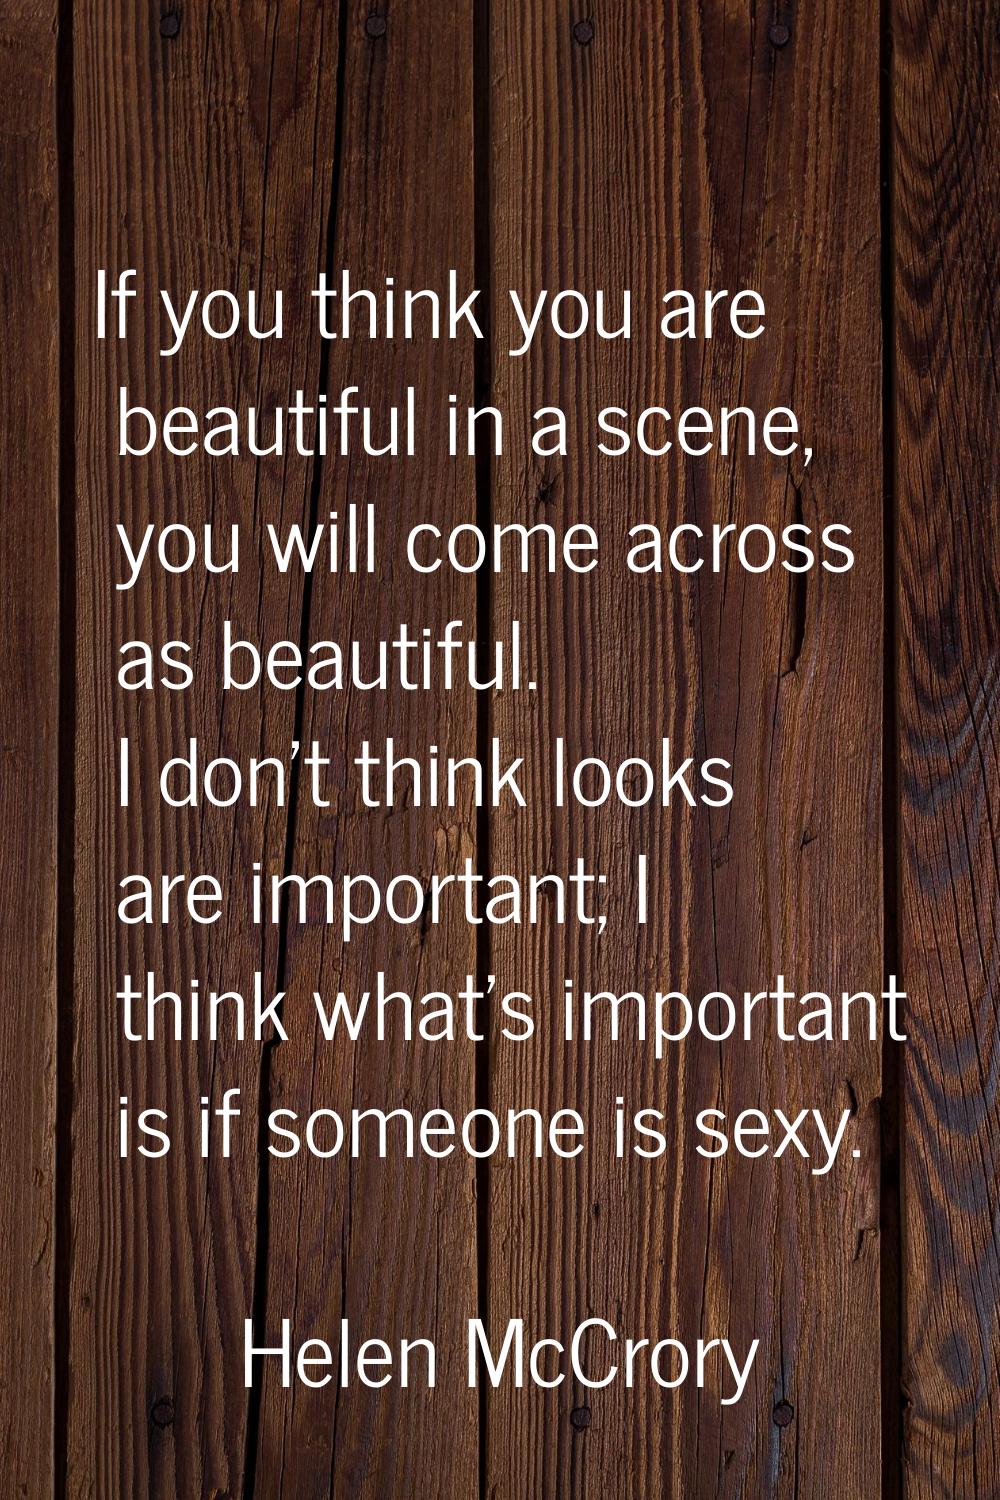 If you think you are beautiful in a scene, you will come across as beautiful. I don't think looks a